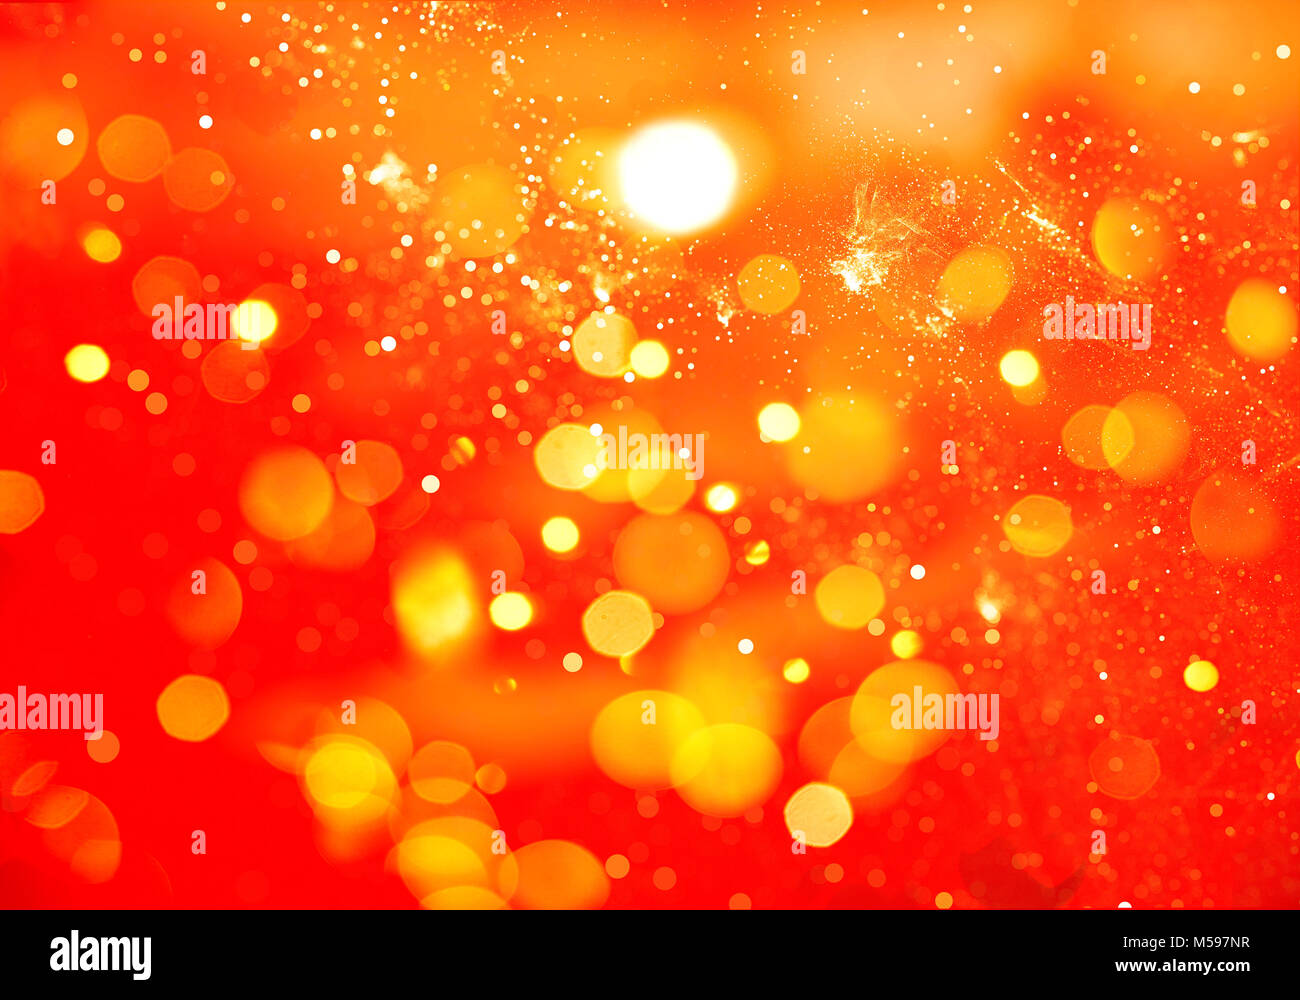 Abstract orange bokeh and glitter background Stock Photo - Alamy